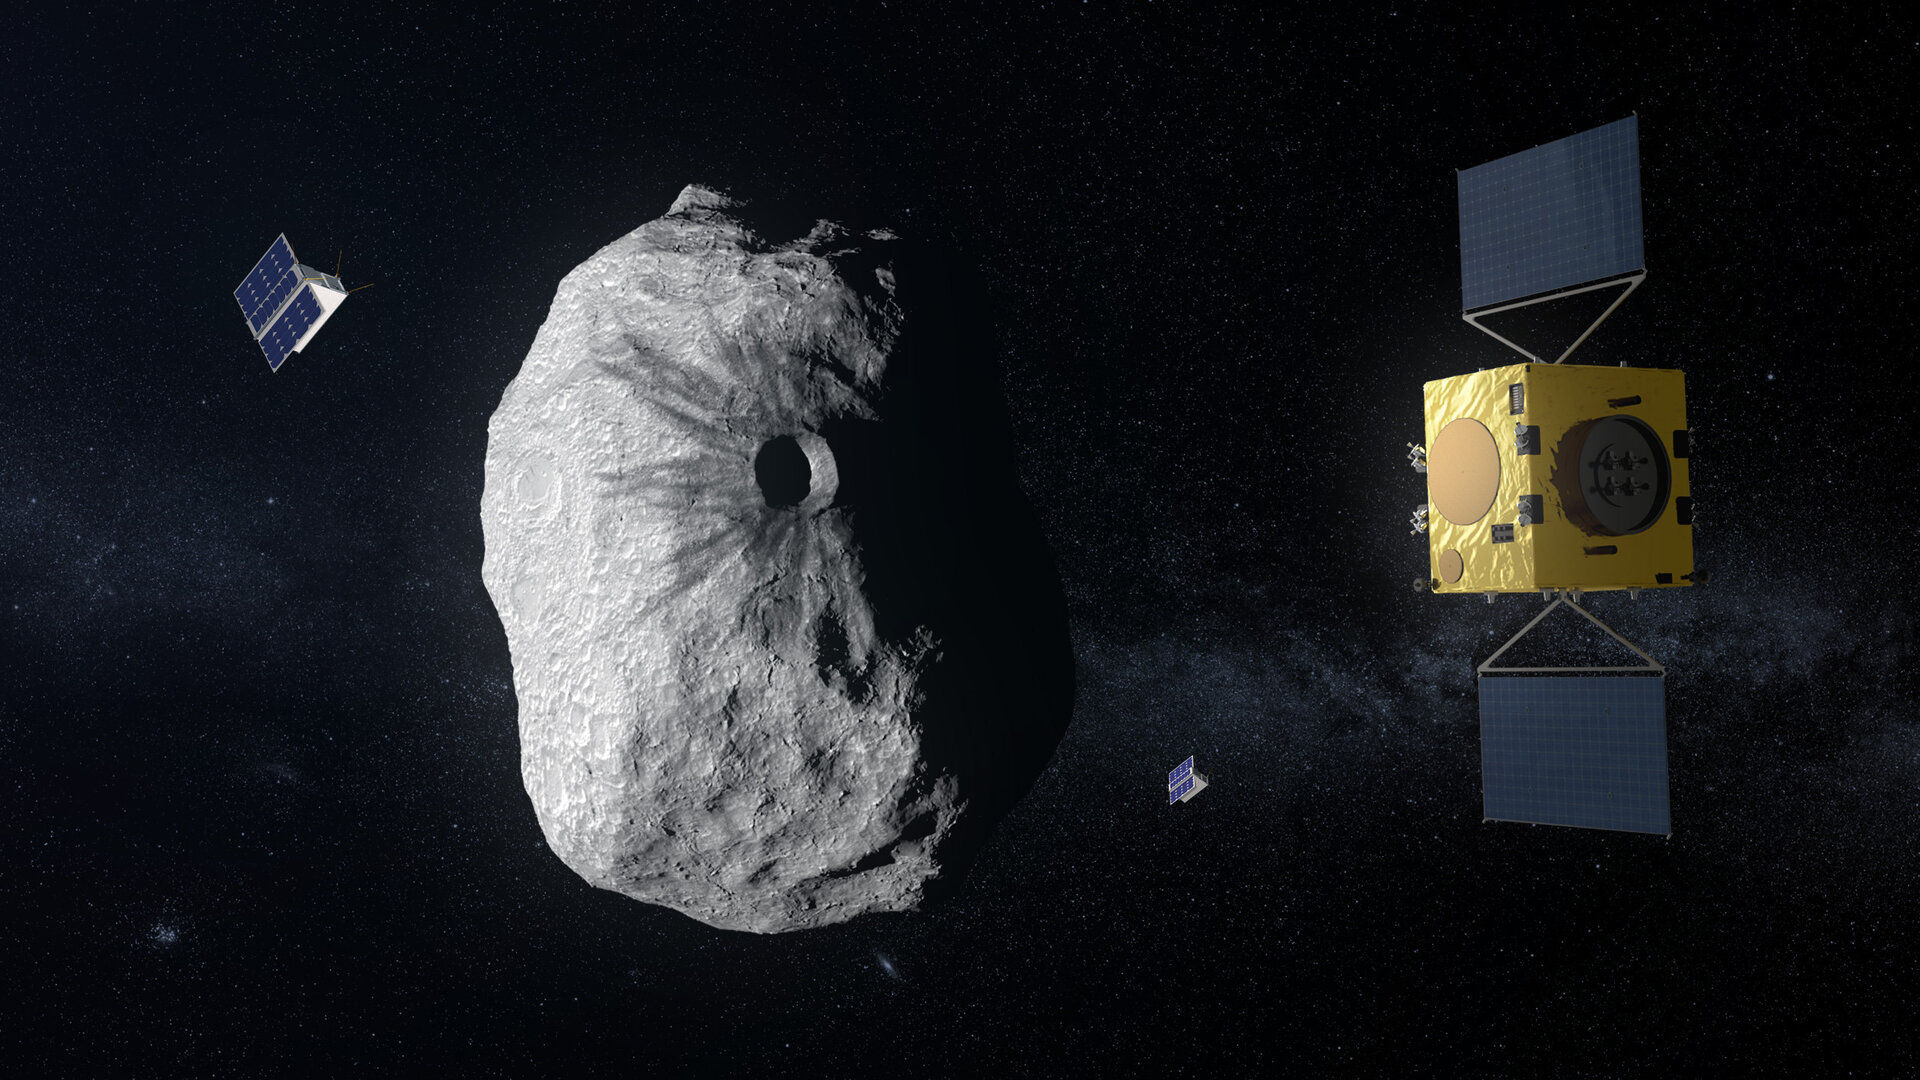 Hera at smallest asteroid ever visited